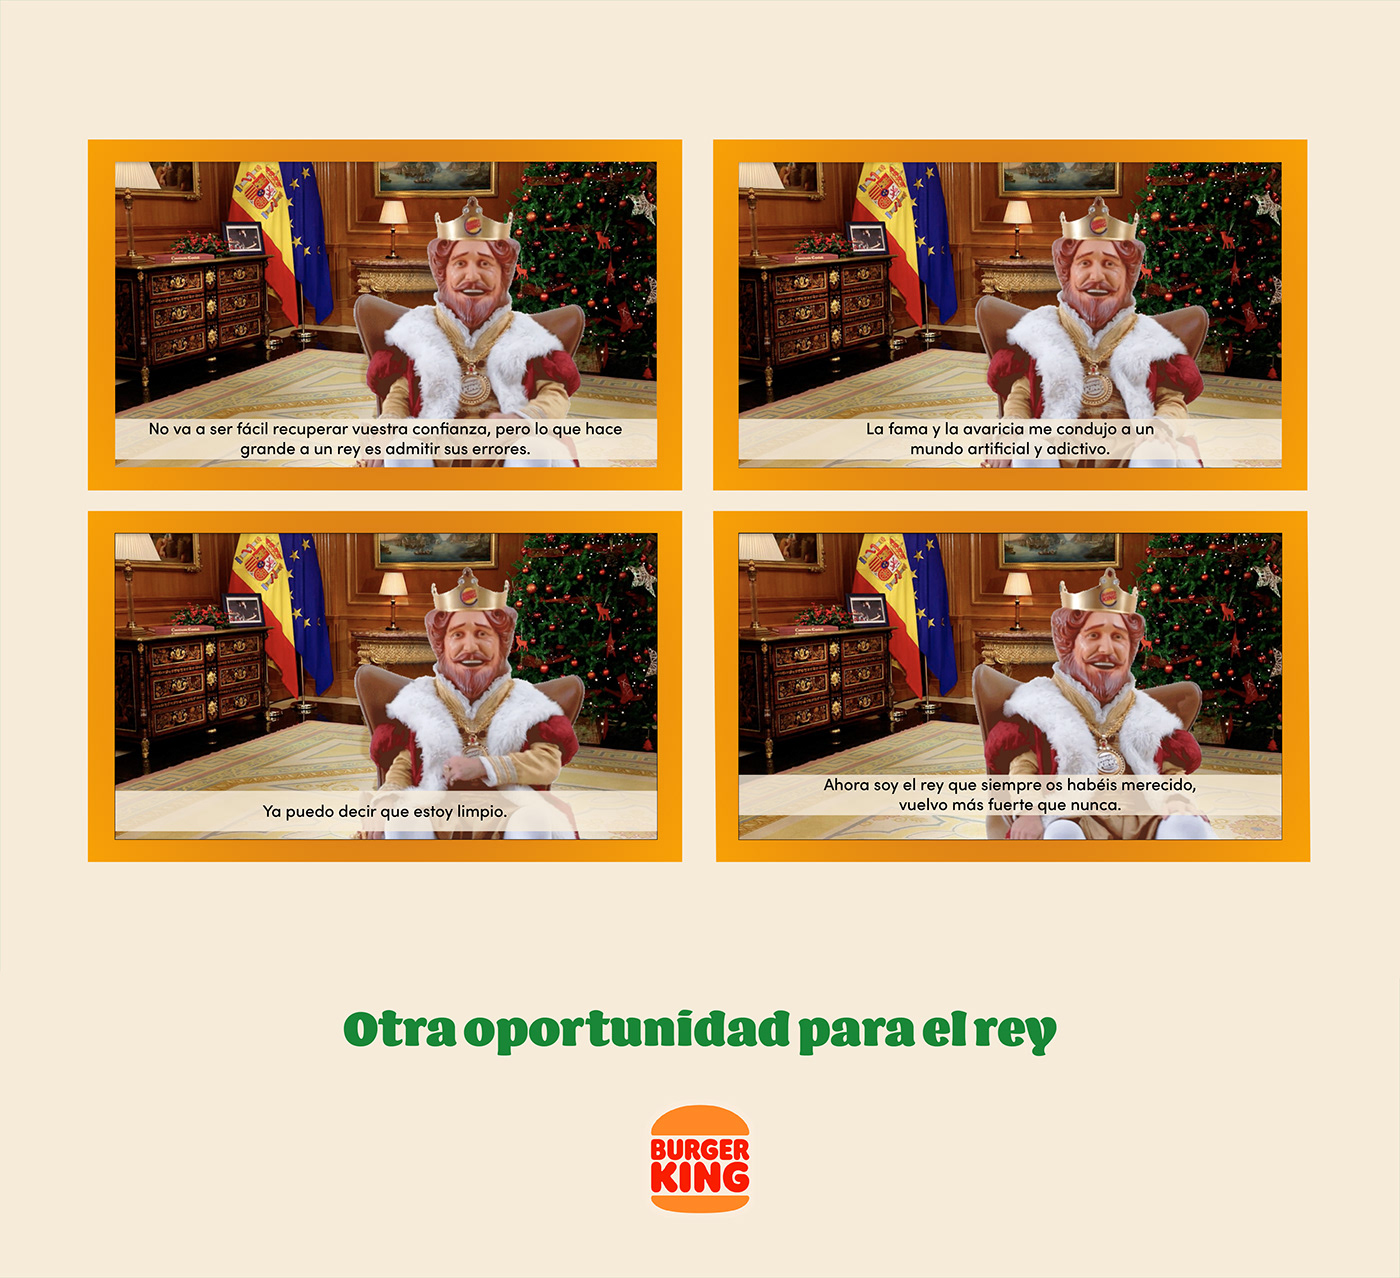 Burger King Spot Drugs king Realfood copy guion autentico Discurso rey